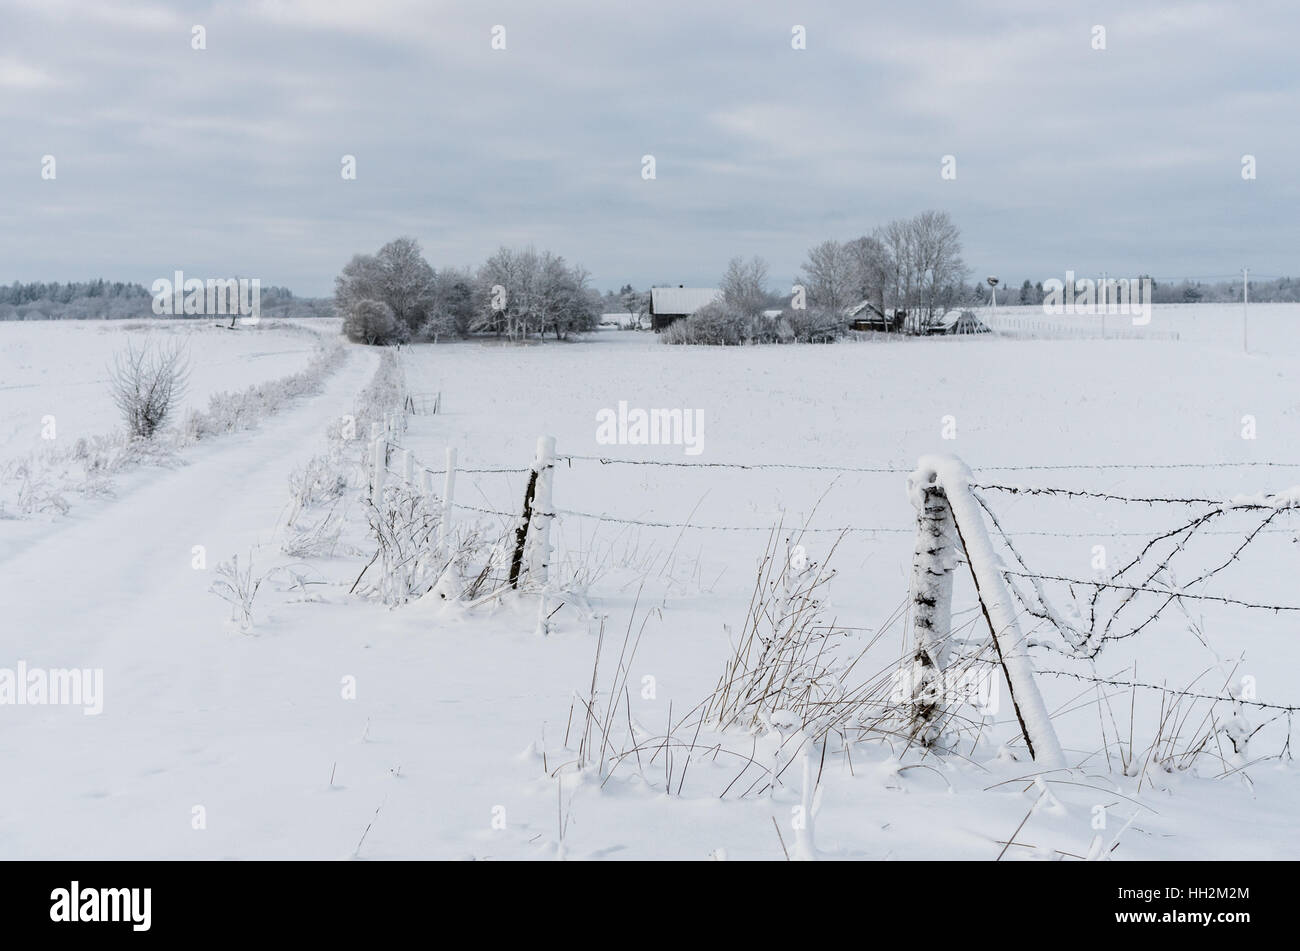 Snowy winter scene with an old farm house in the countryside. Stock Photo